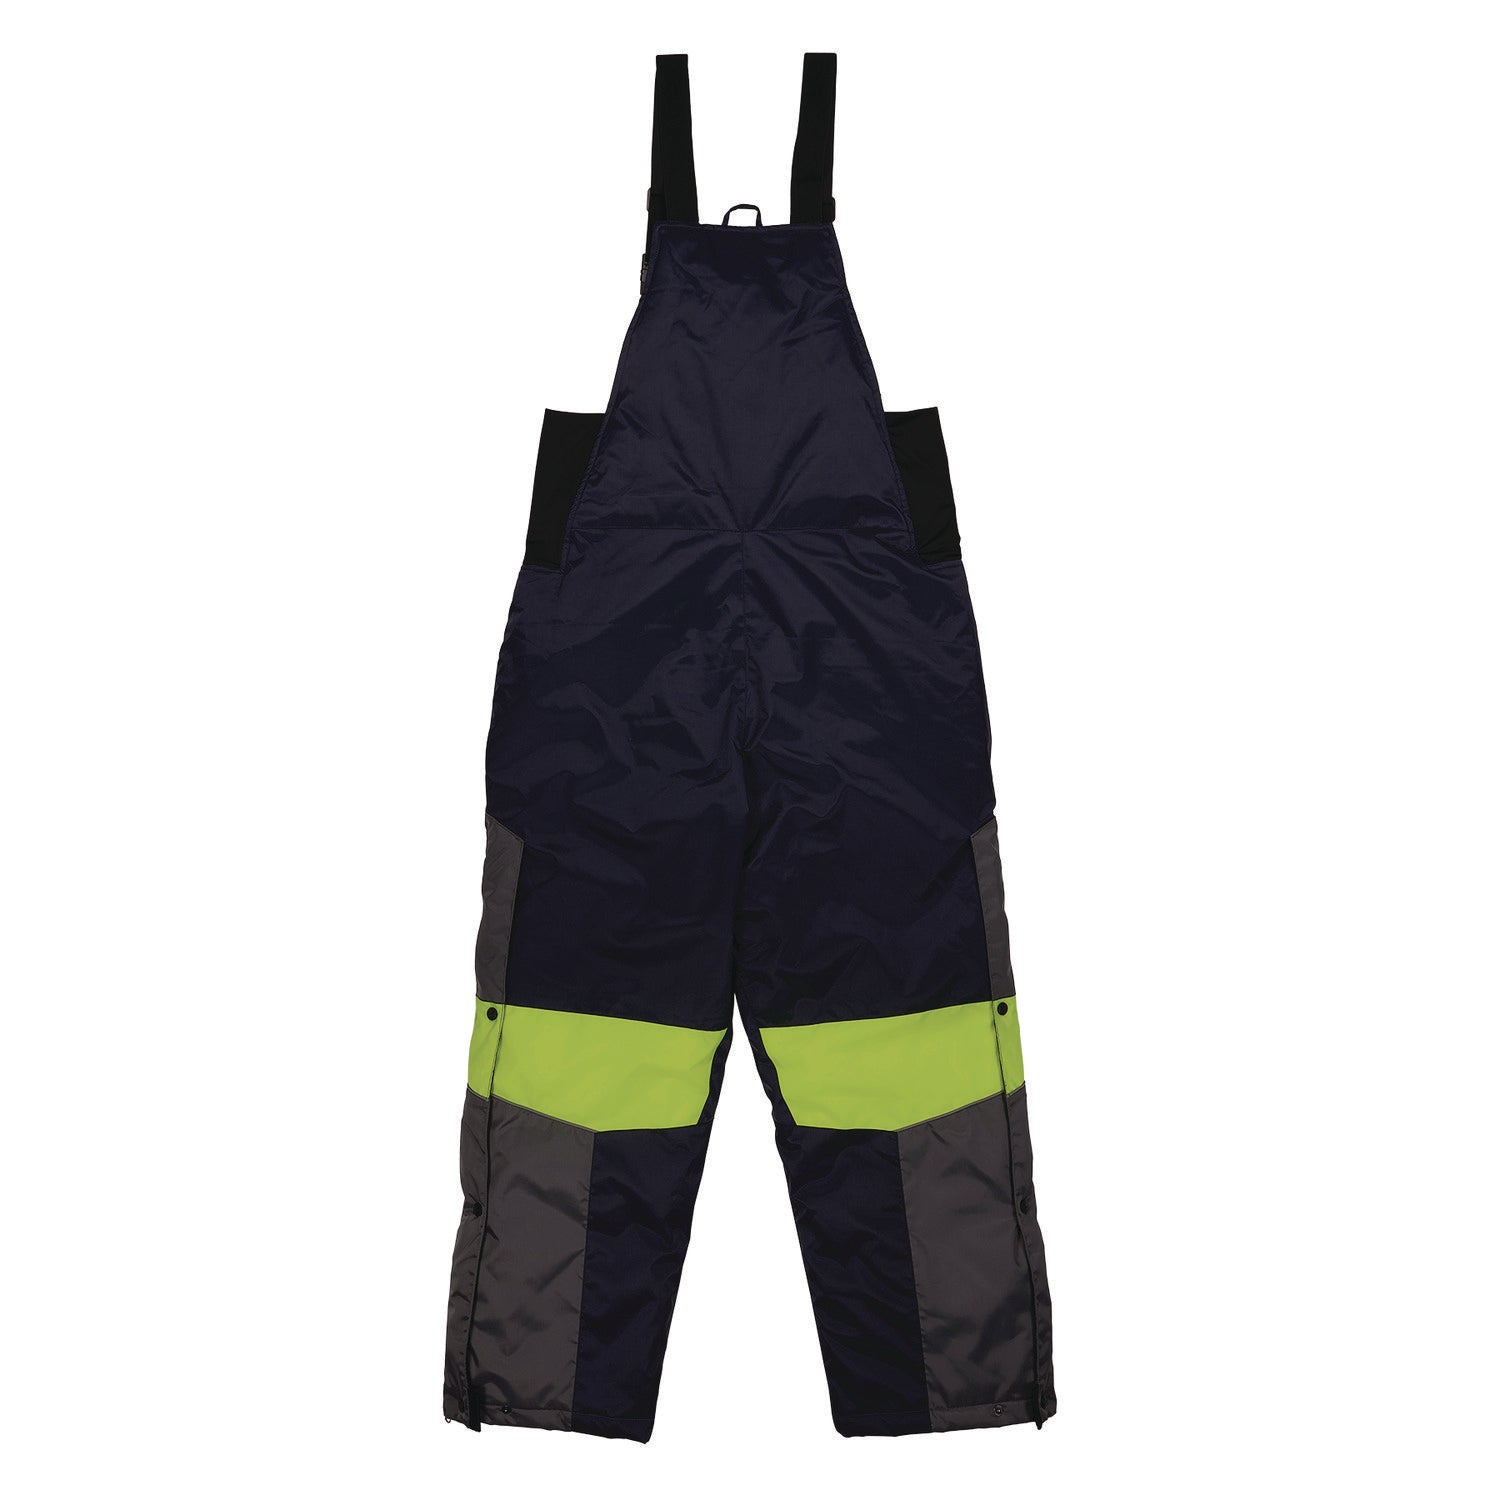 n-ferno-6477-insulated-cooler-bib-overall-small-navy-ships-in-1-3-business-days_ego41262 - 2